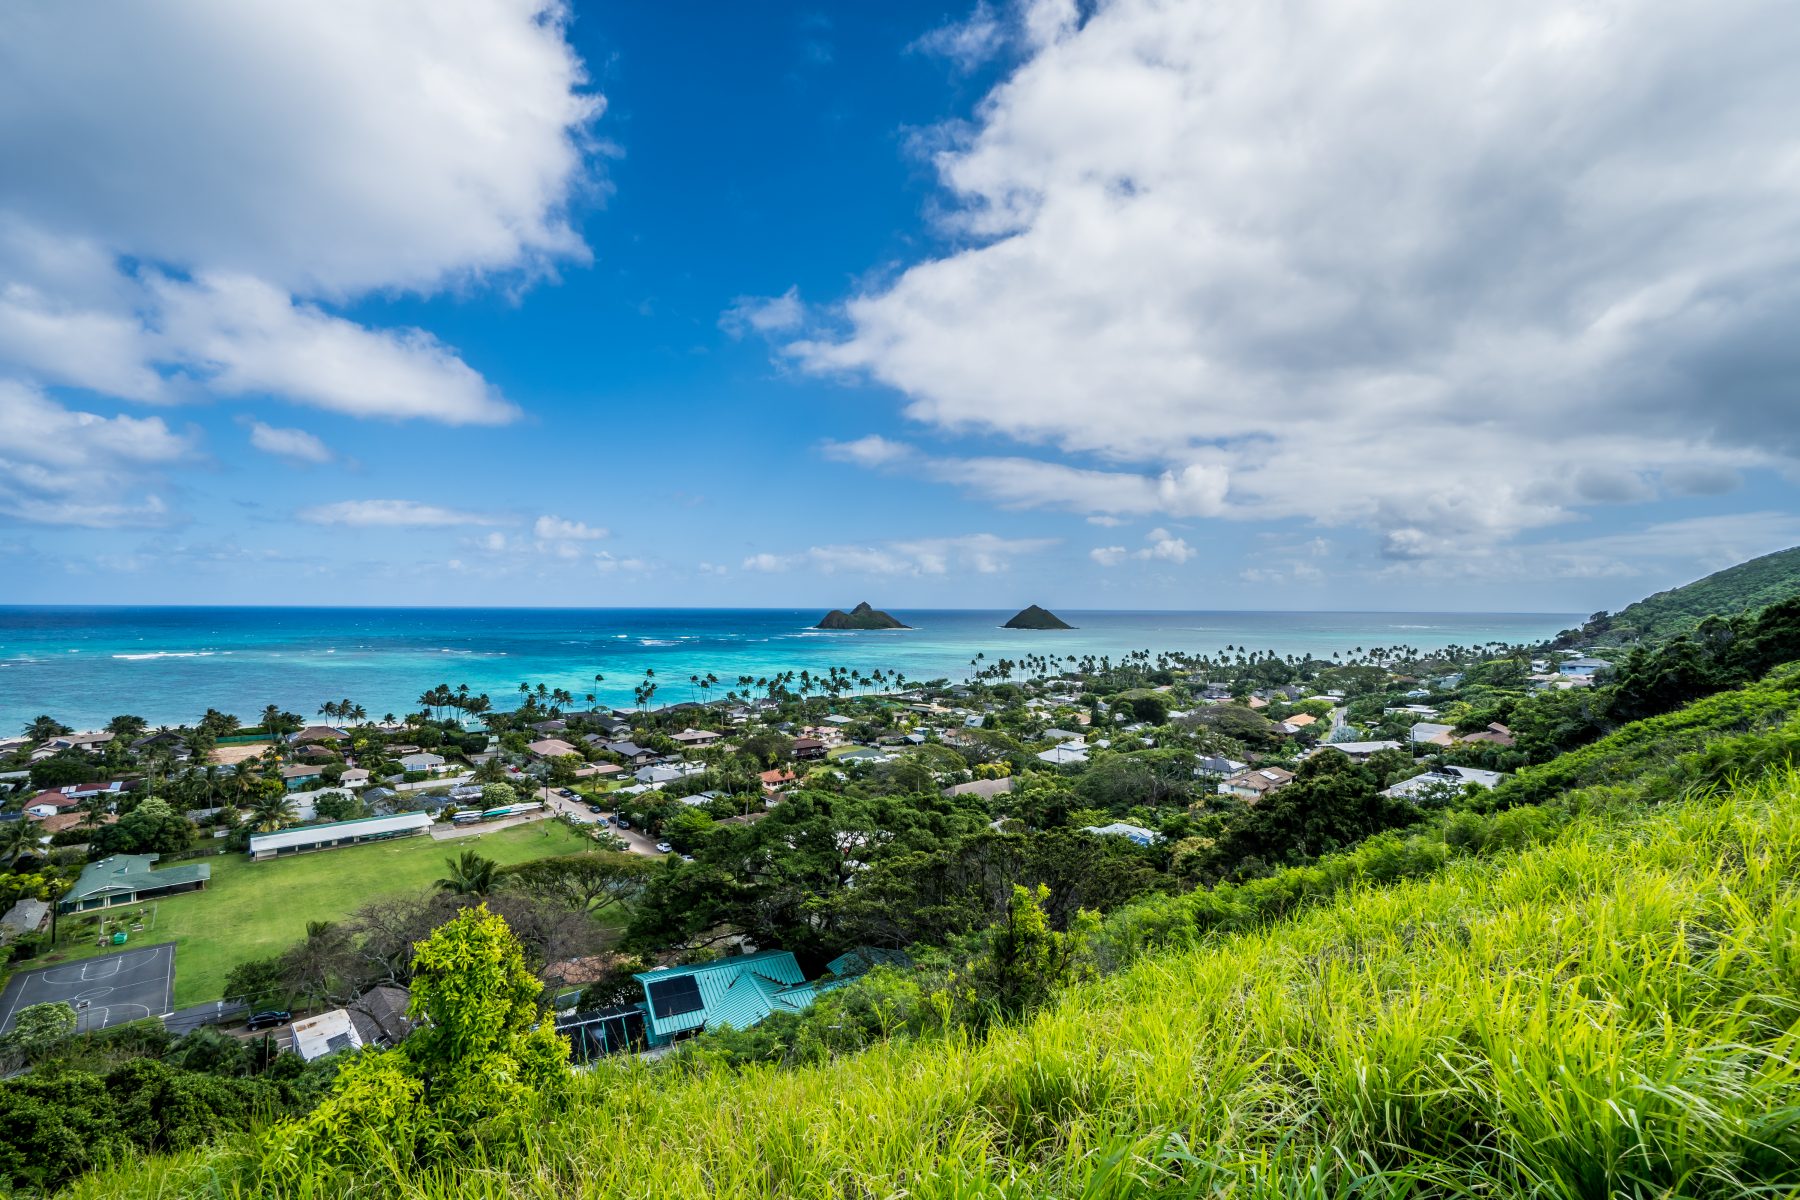 Right from the beginning, you will have stunning views of Lanikai and the Mokulua Islands State Seabird Sanctuary